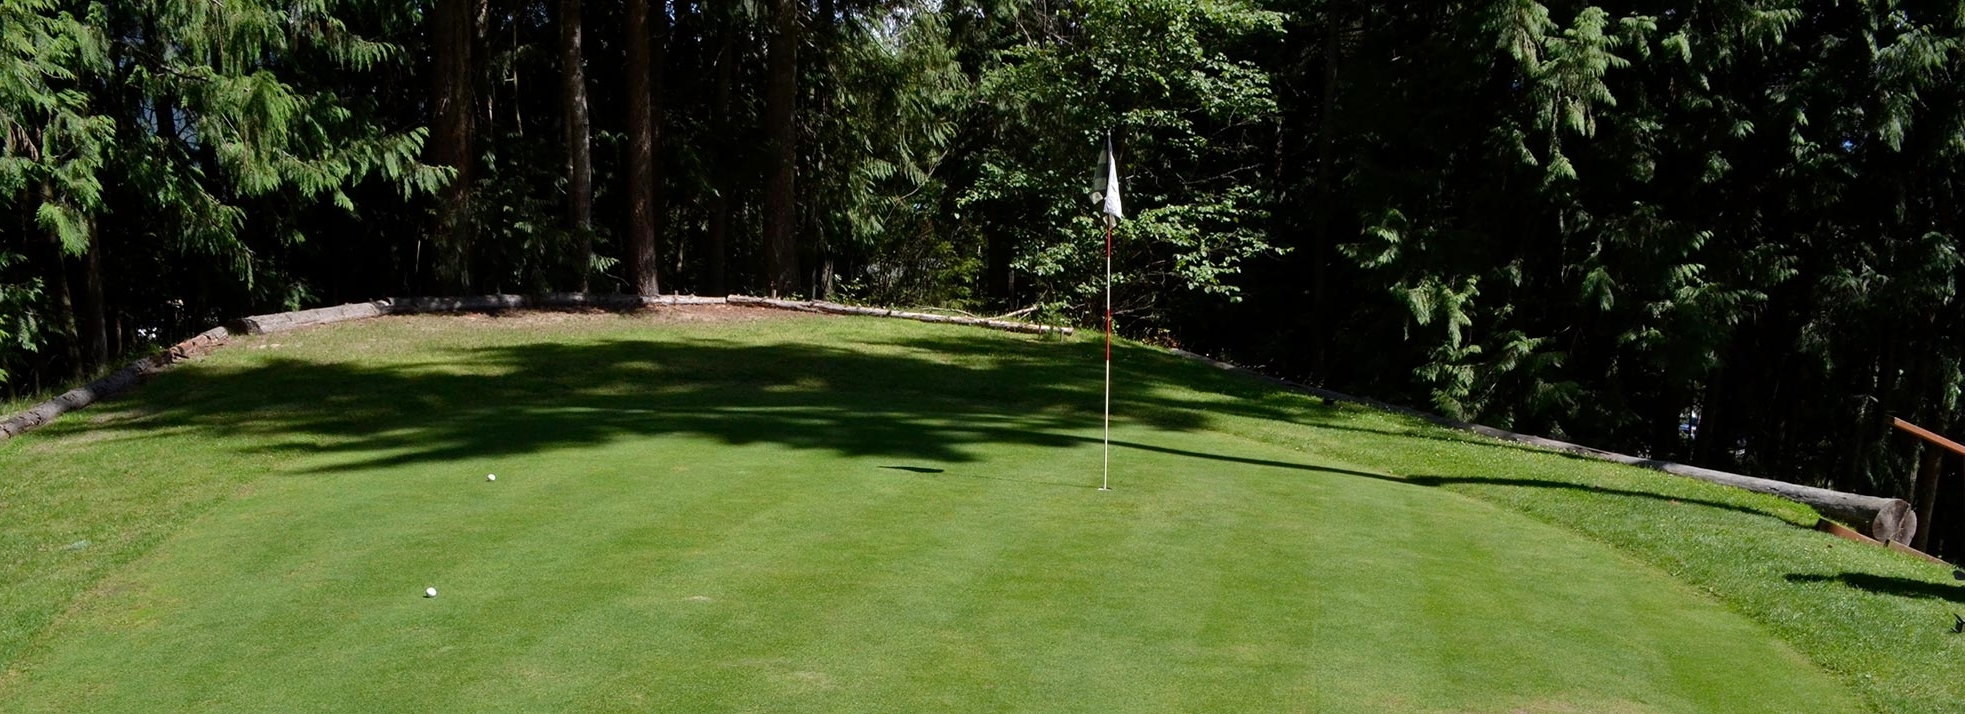 Cedar Heights Golf: Cedar Heights Golf course is a beautiful, treed, 5 acre par 3 pitch & putt course. A practice driving cage and club rentals are available.